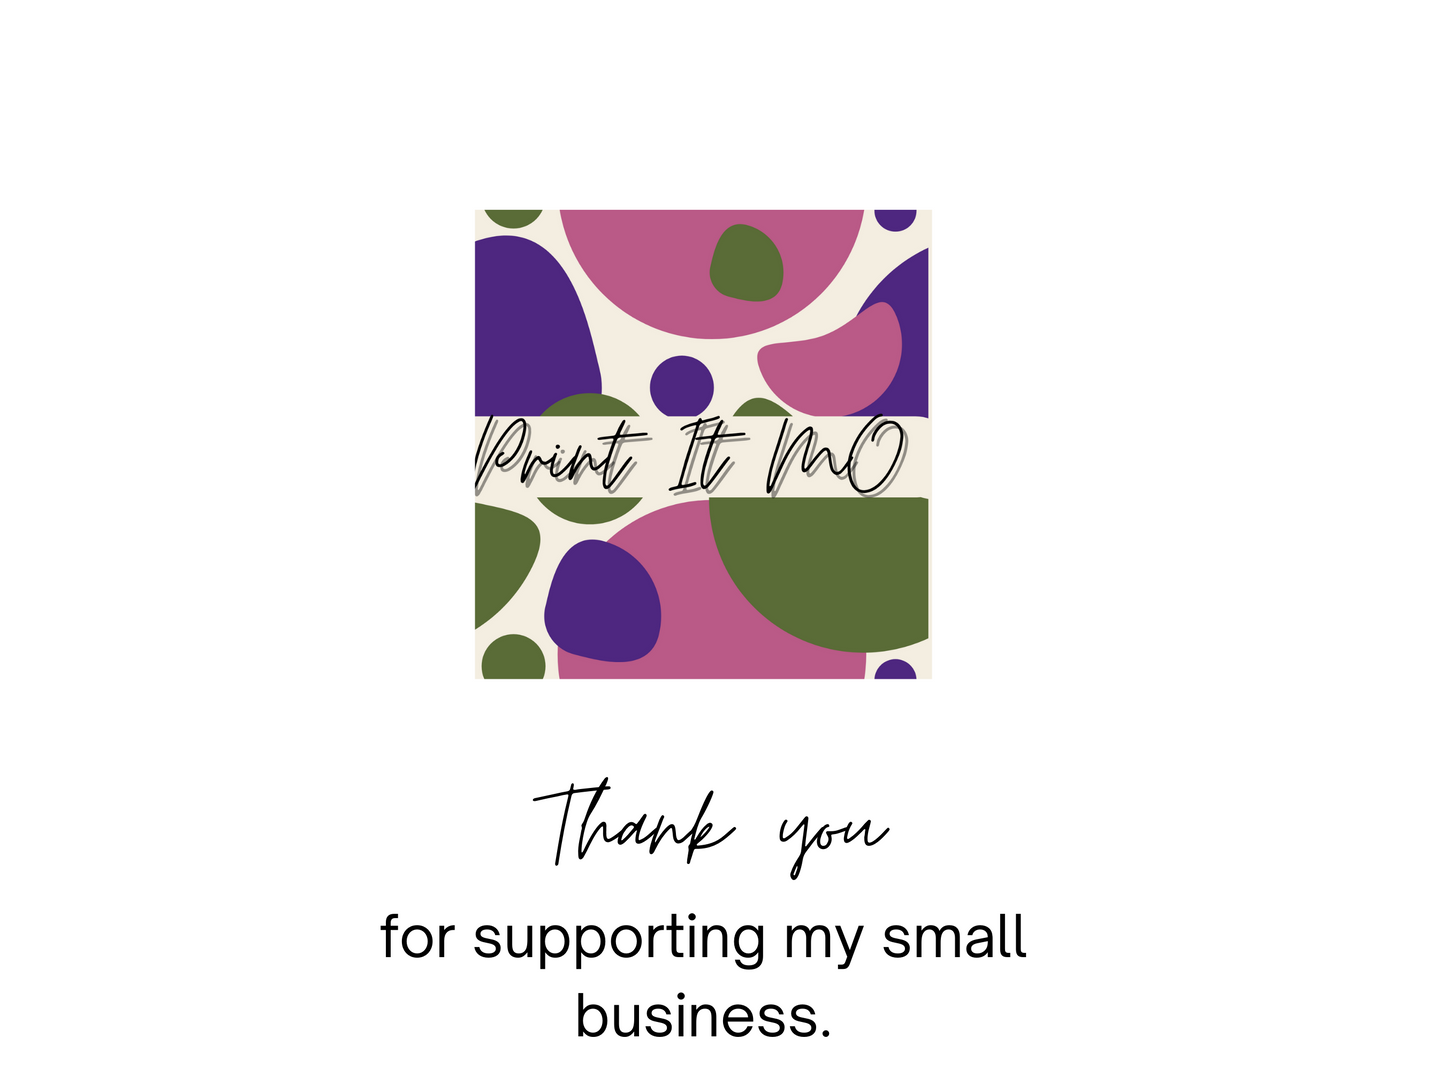 Print It Mo logo and thank you message.